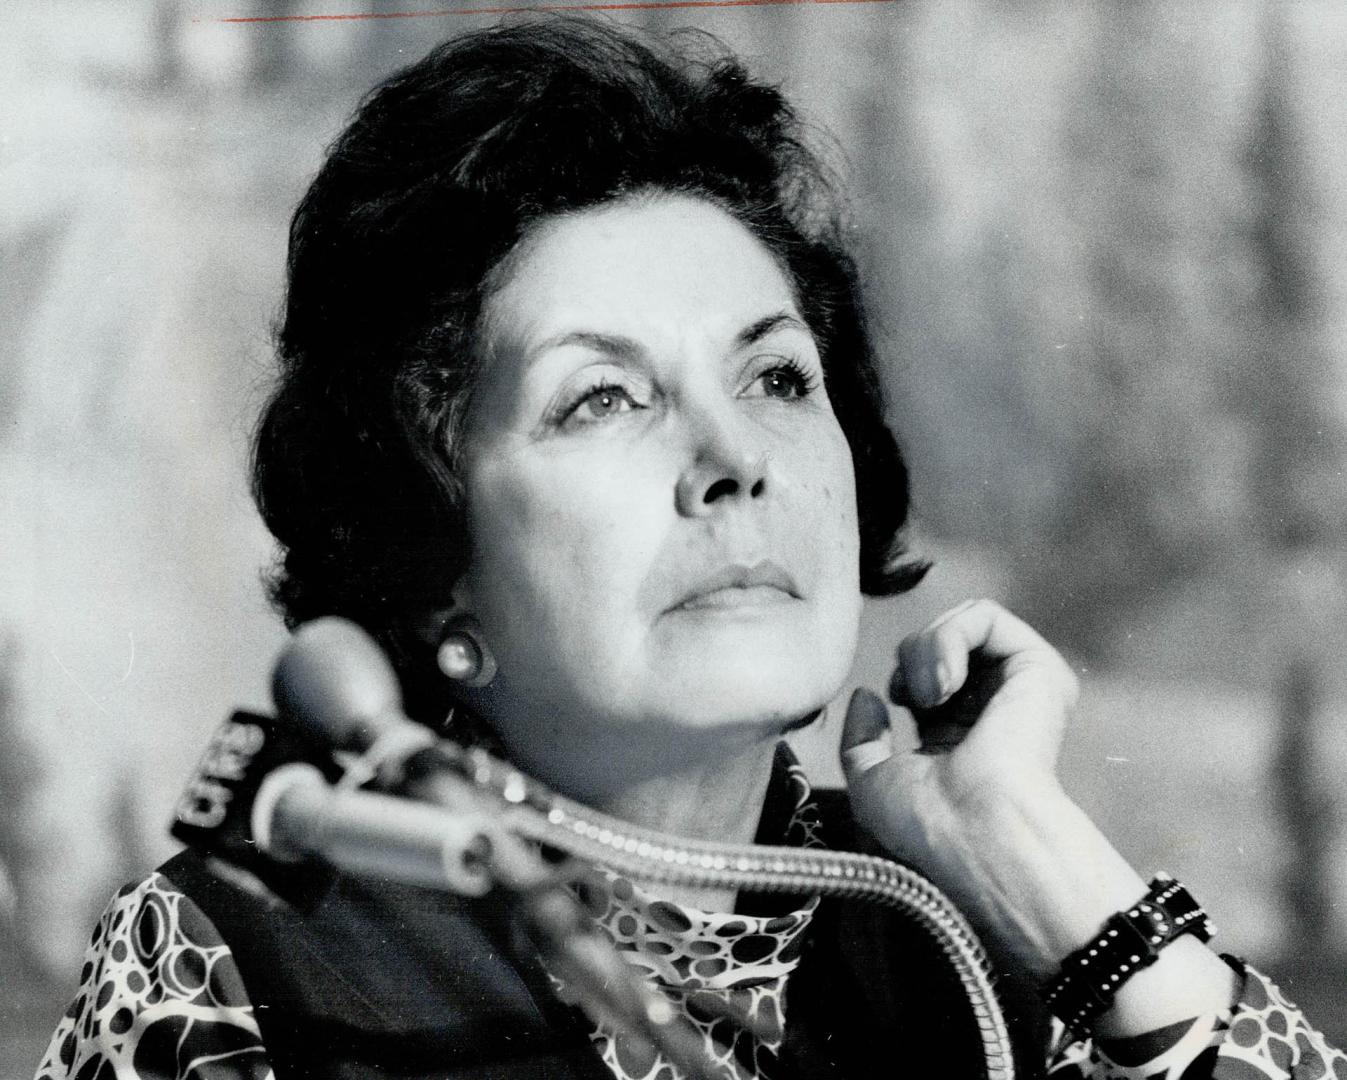 Hortensia Allende, widow of Chile's former president, is criticized by reader for wanting boycott on goods from Chile